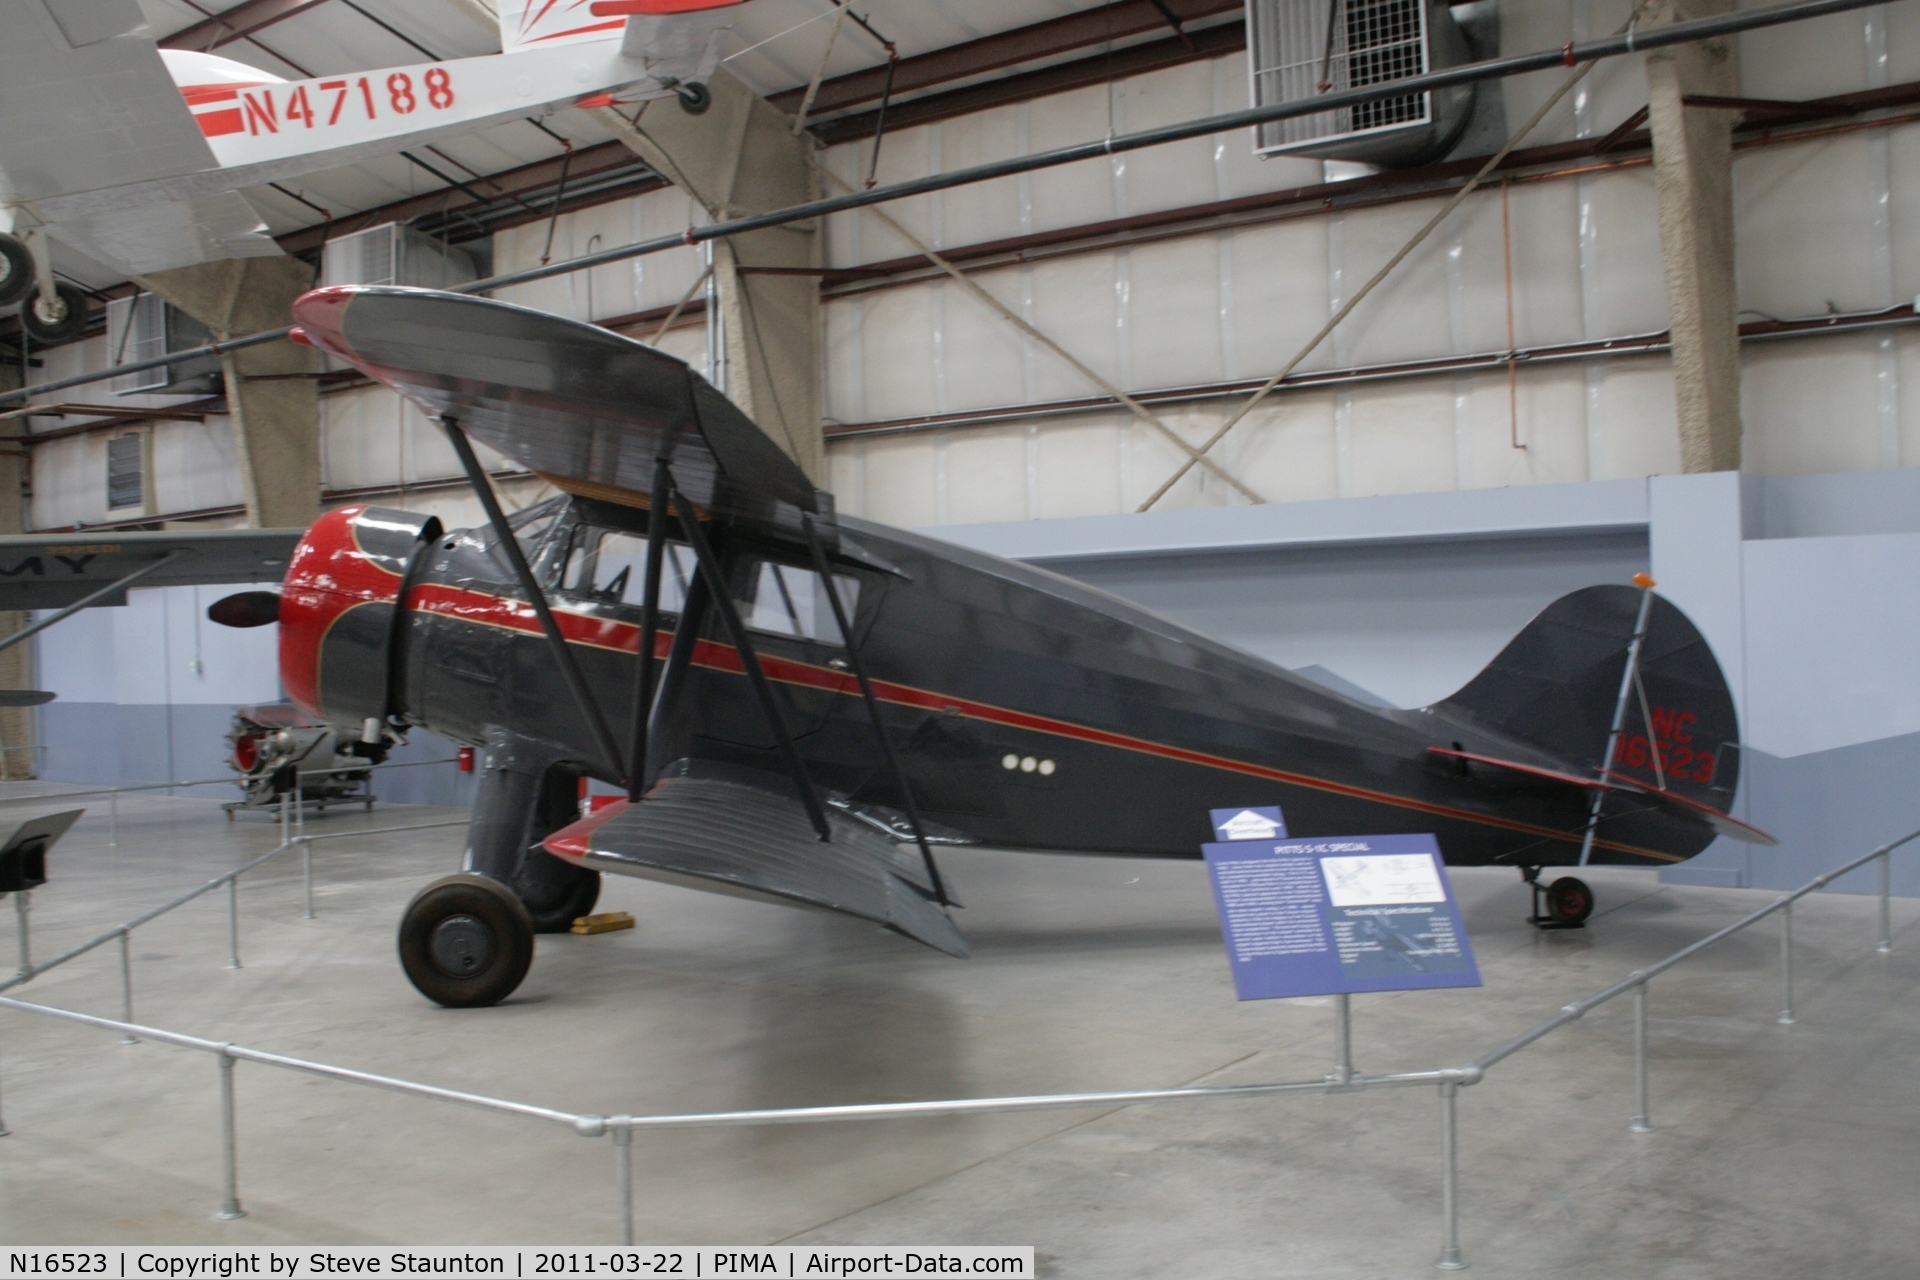 N16523, 1936 Waco ZKS-6 C/N 4512, Taken at Pima Air and Space Museum, in March 2011 whilst on an Aeroprint Aviation tour